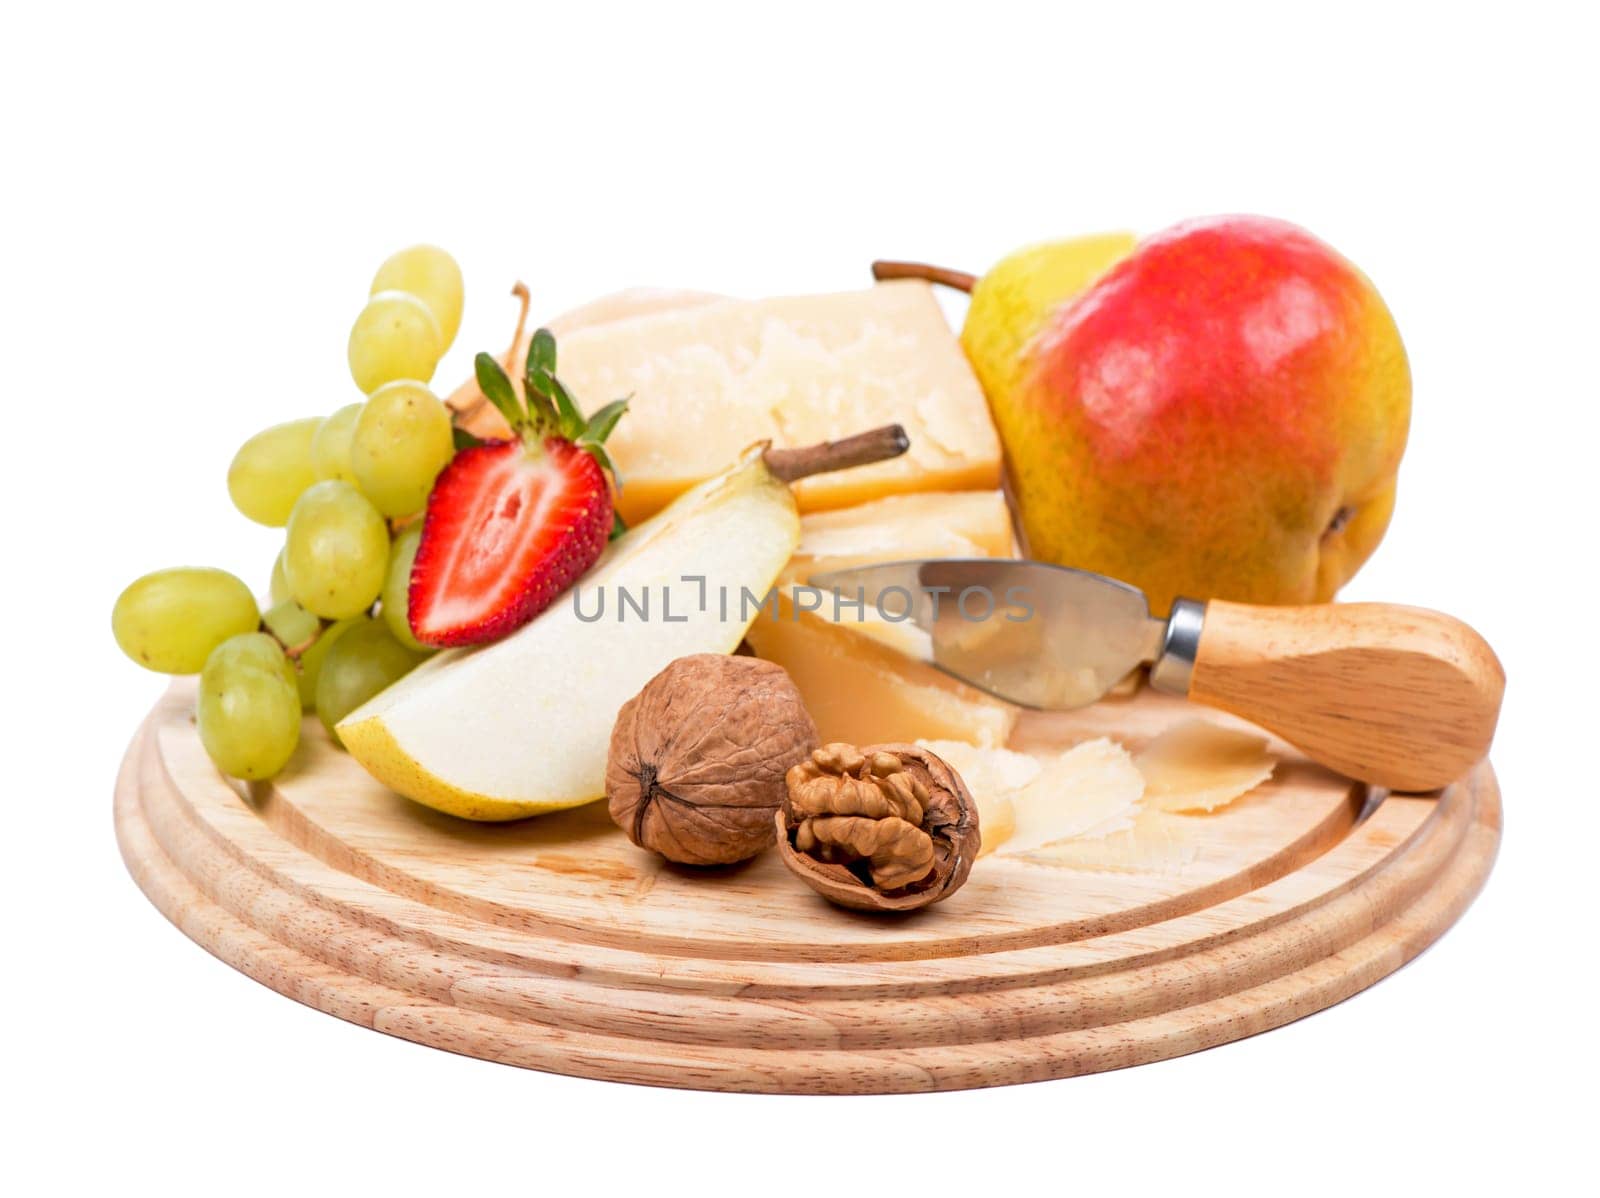 cheese and fruit. parmesan cheese, nuts and ripe pears on a wooden board on a white background by aprilphoto